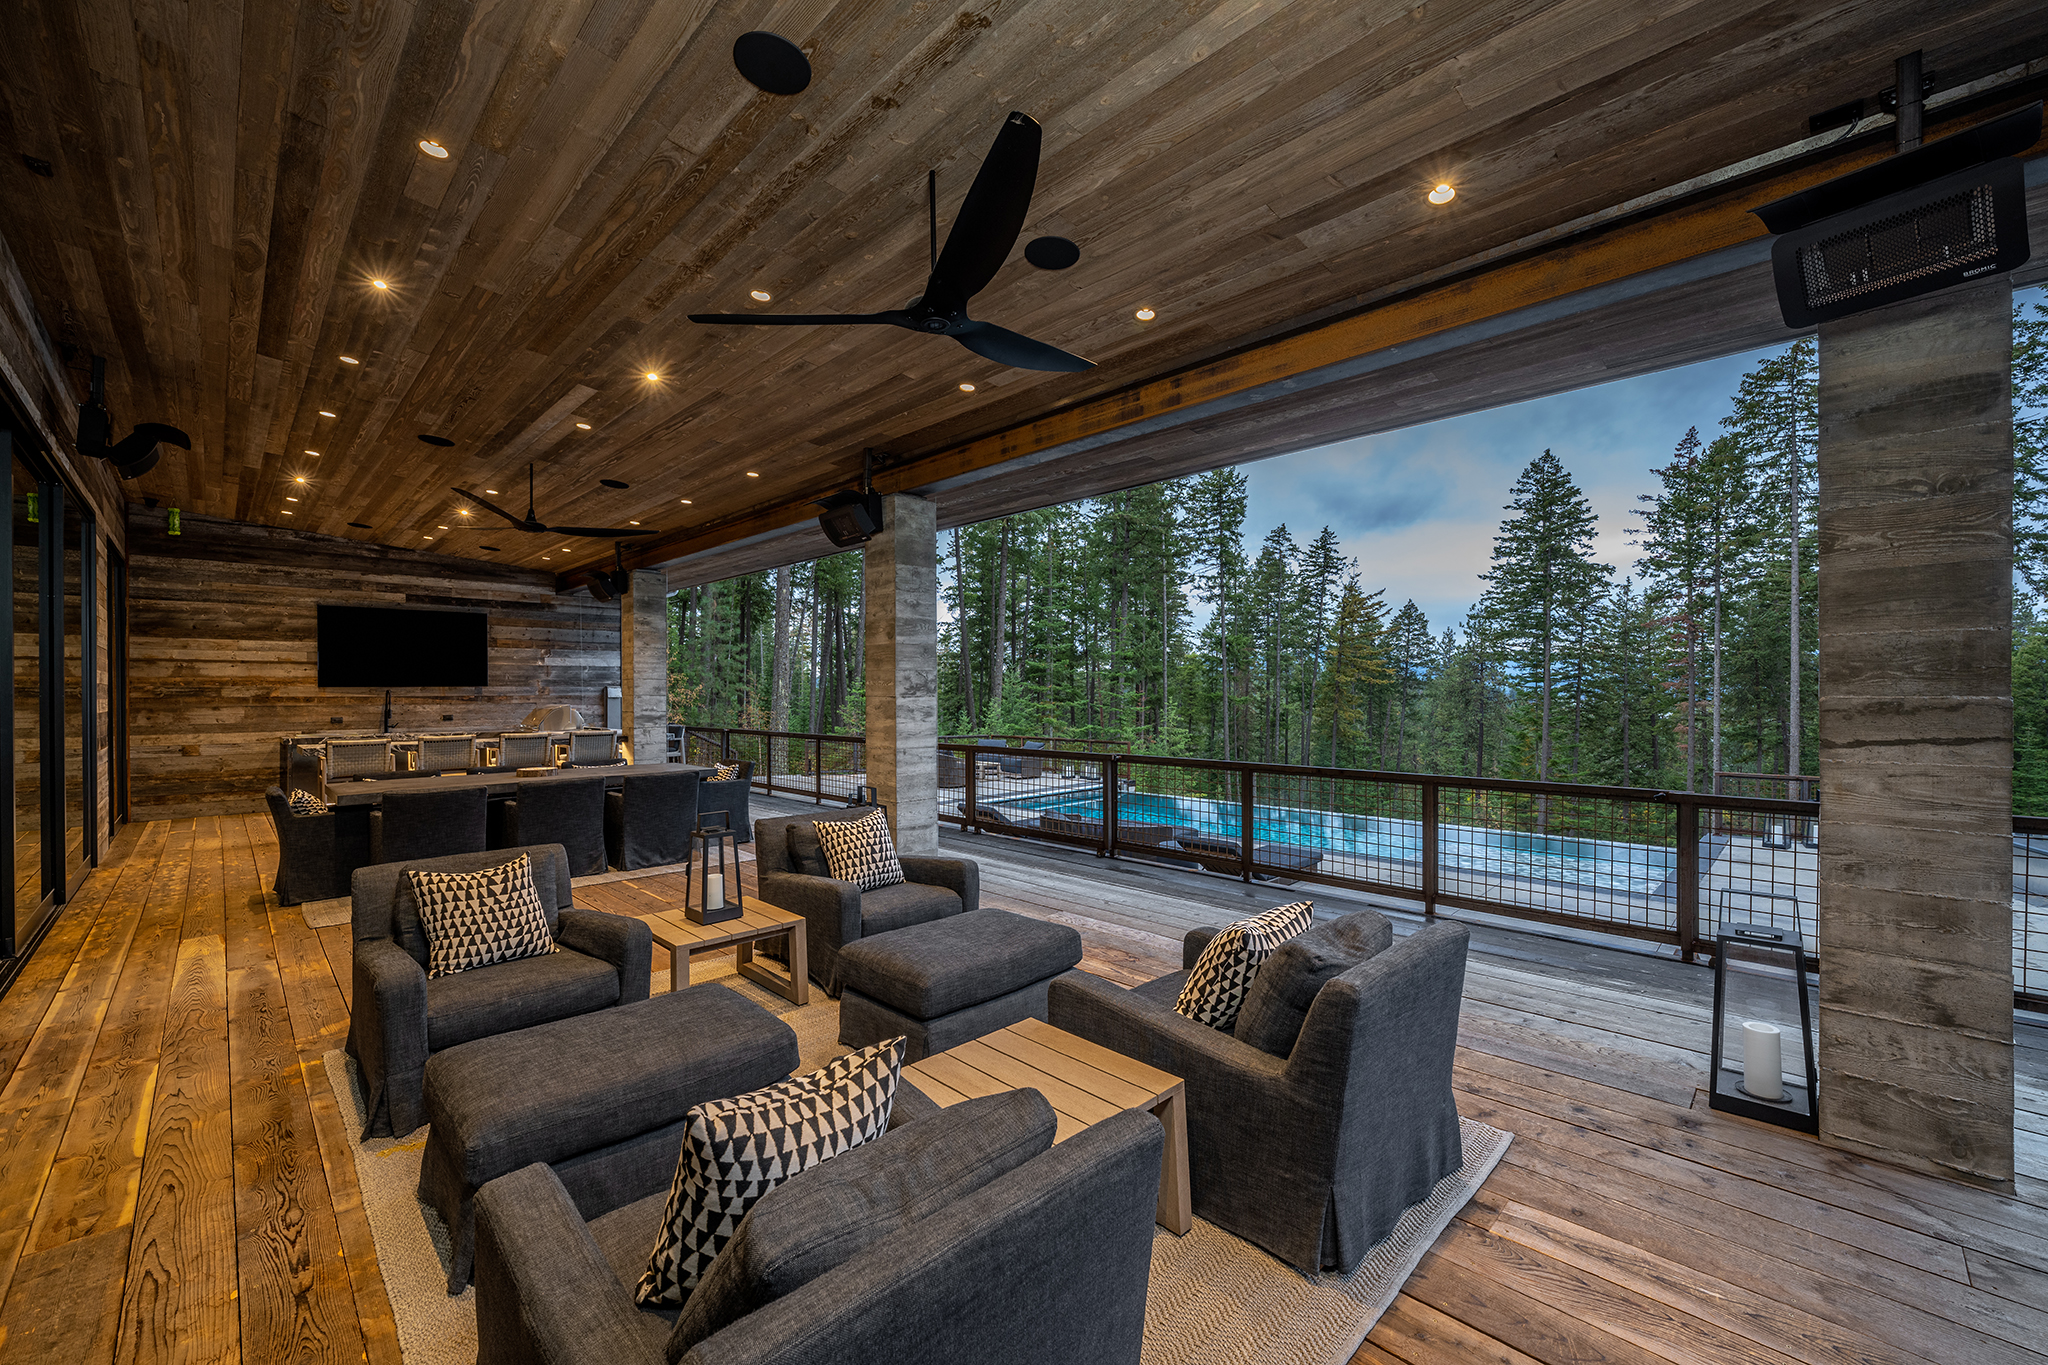 The covered deck space offers plenty of room for entertaining and a great view of the pool and surrounding trees.